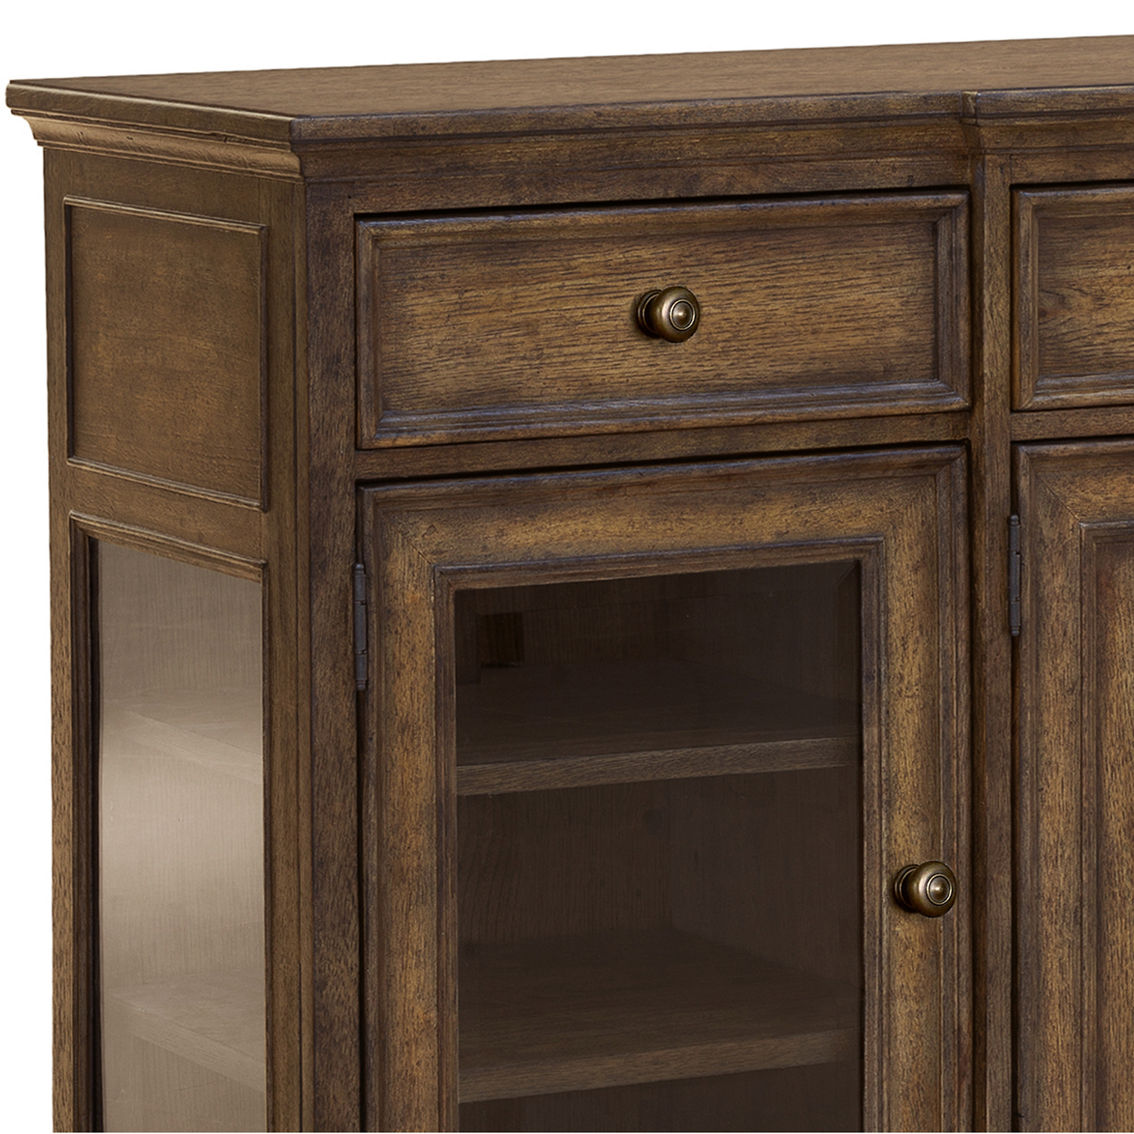 Pulaski Furniture Revival Row 3-Drawer Buffet with Cabinet Doors - Image 5 of 6